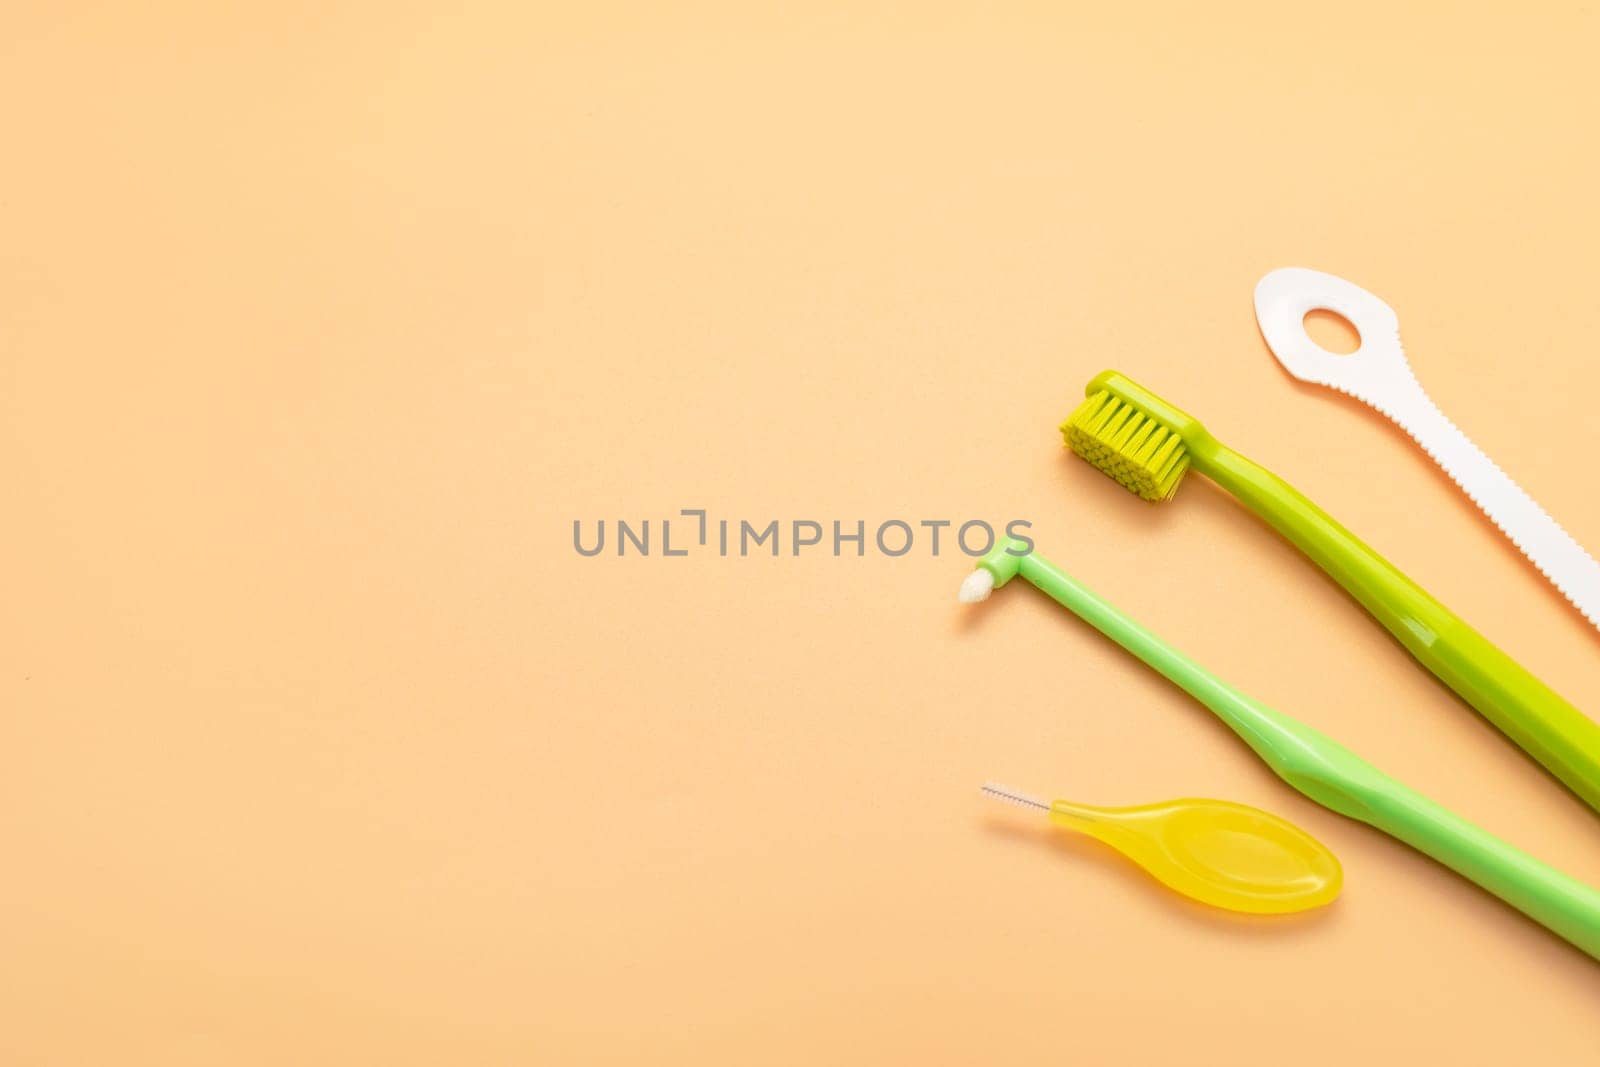 Design Individual Dental Oral Hygiene Set Kit. Dentistry White Tongue Scraper, Toothbrush, Interdental Toothbrush For Cleaning Between Teeth On Peach Yellow Background. Copy Space Horizontal Plane. by netatsi